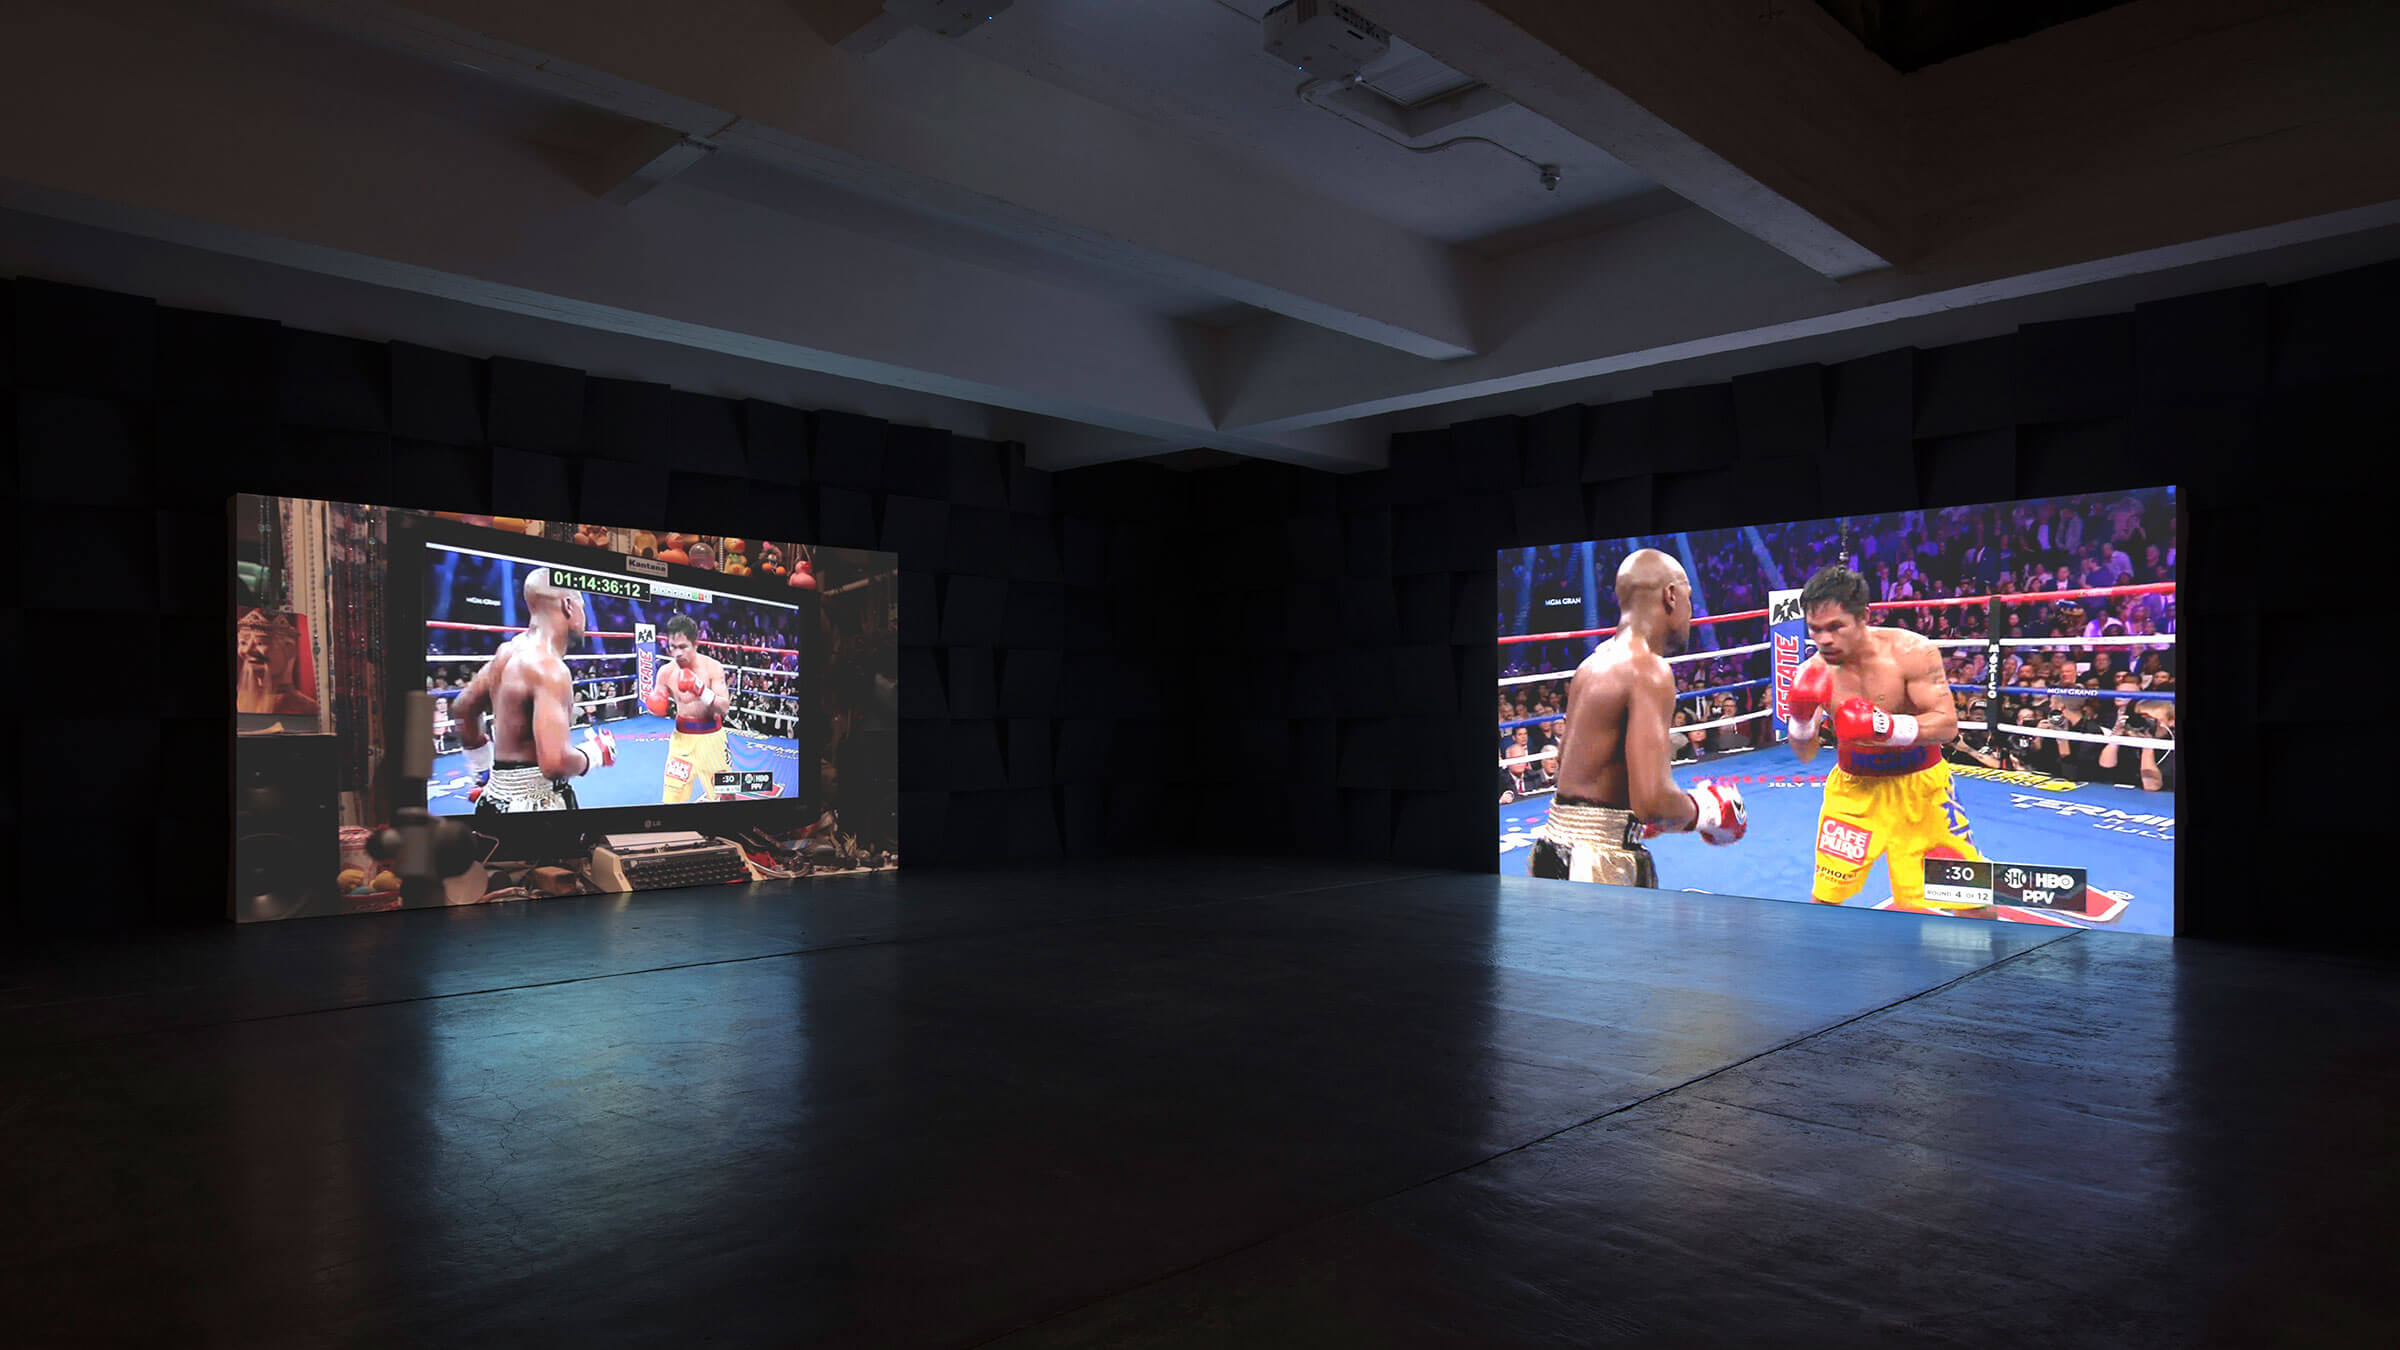 Paul Pfeiffer, <em>Three Figures In A Room</em>, 2015-16 two synced video channels on two projectors, four synced audio channels, Mac Minis  dimensions variable 48 minutes, looped © Paul Pfeiffer.